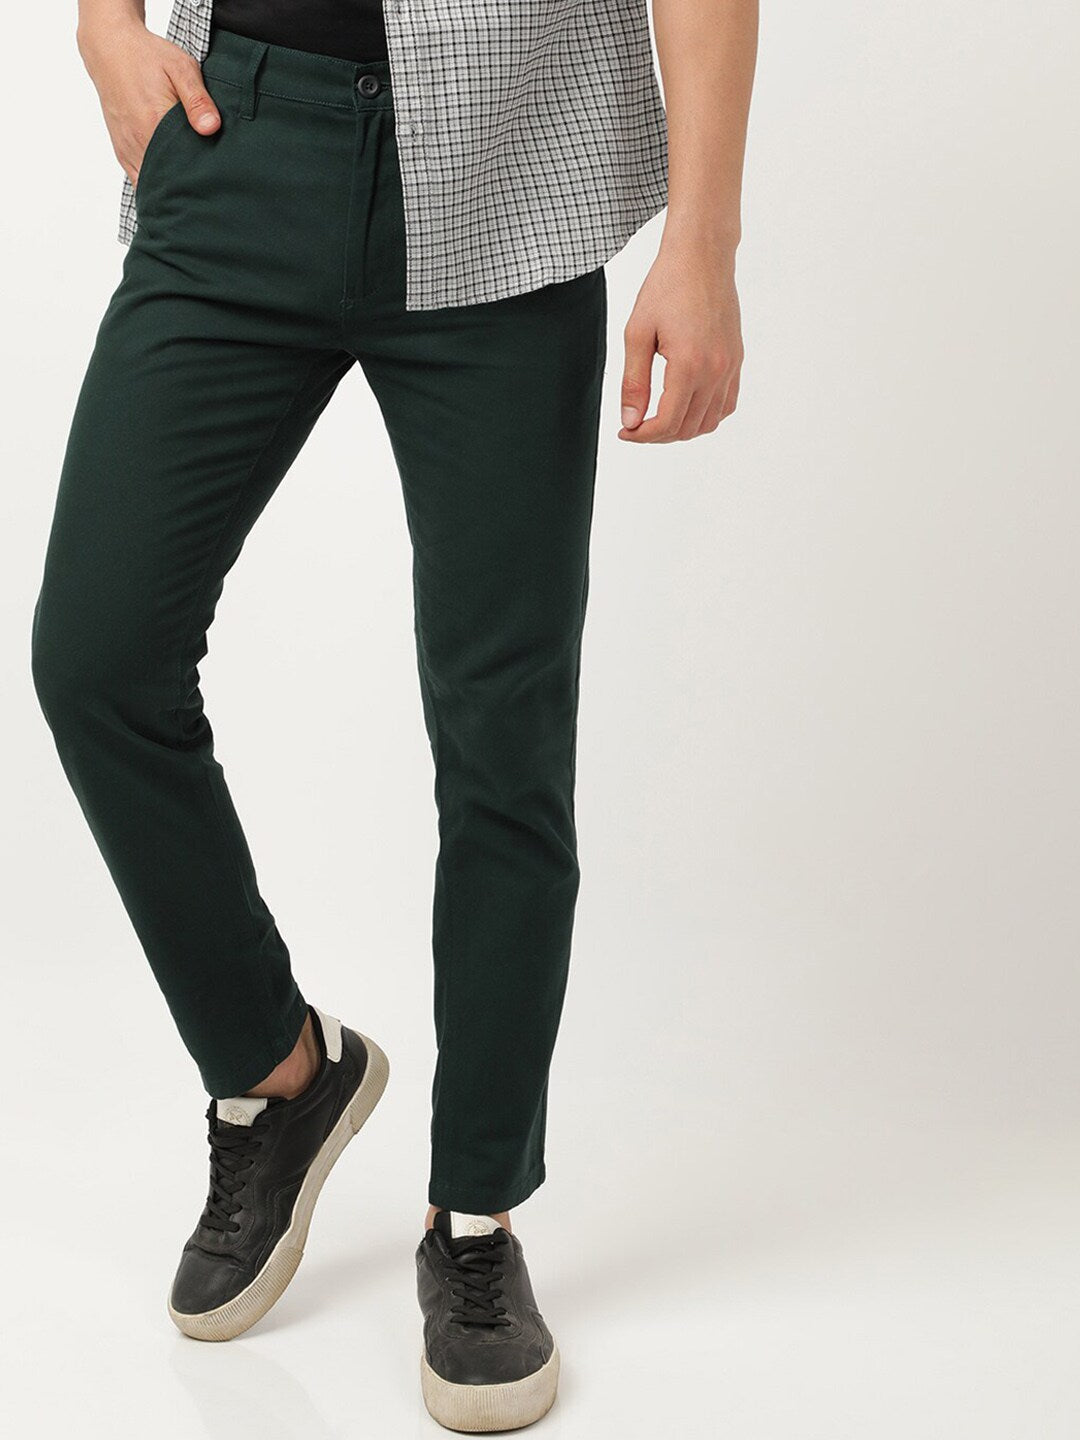 Shop Men Solid Mid-Rise Chinos Online.